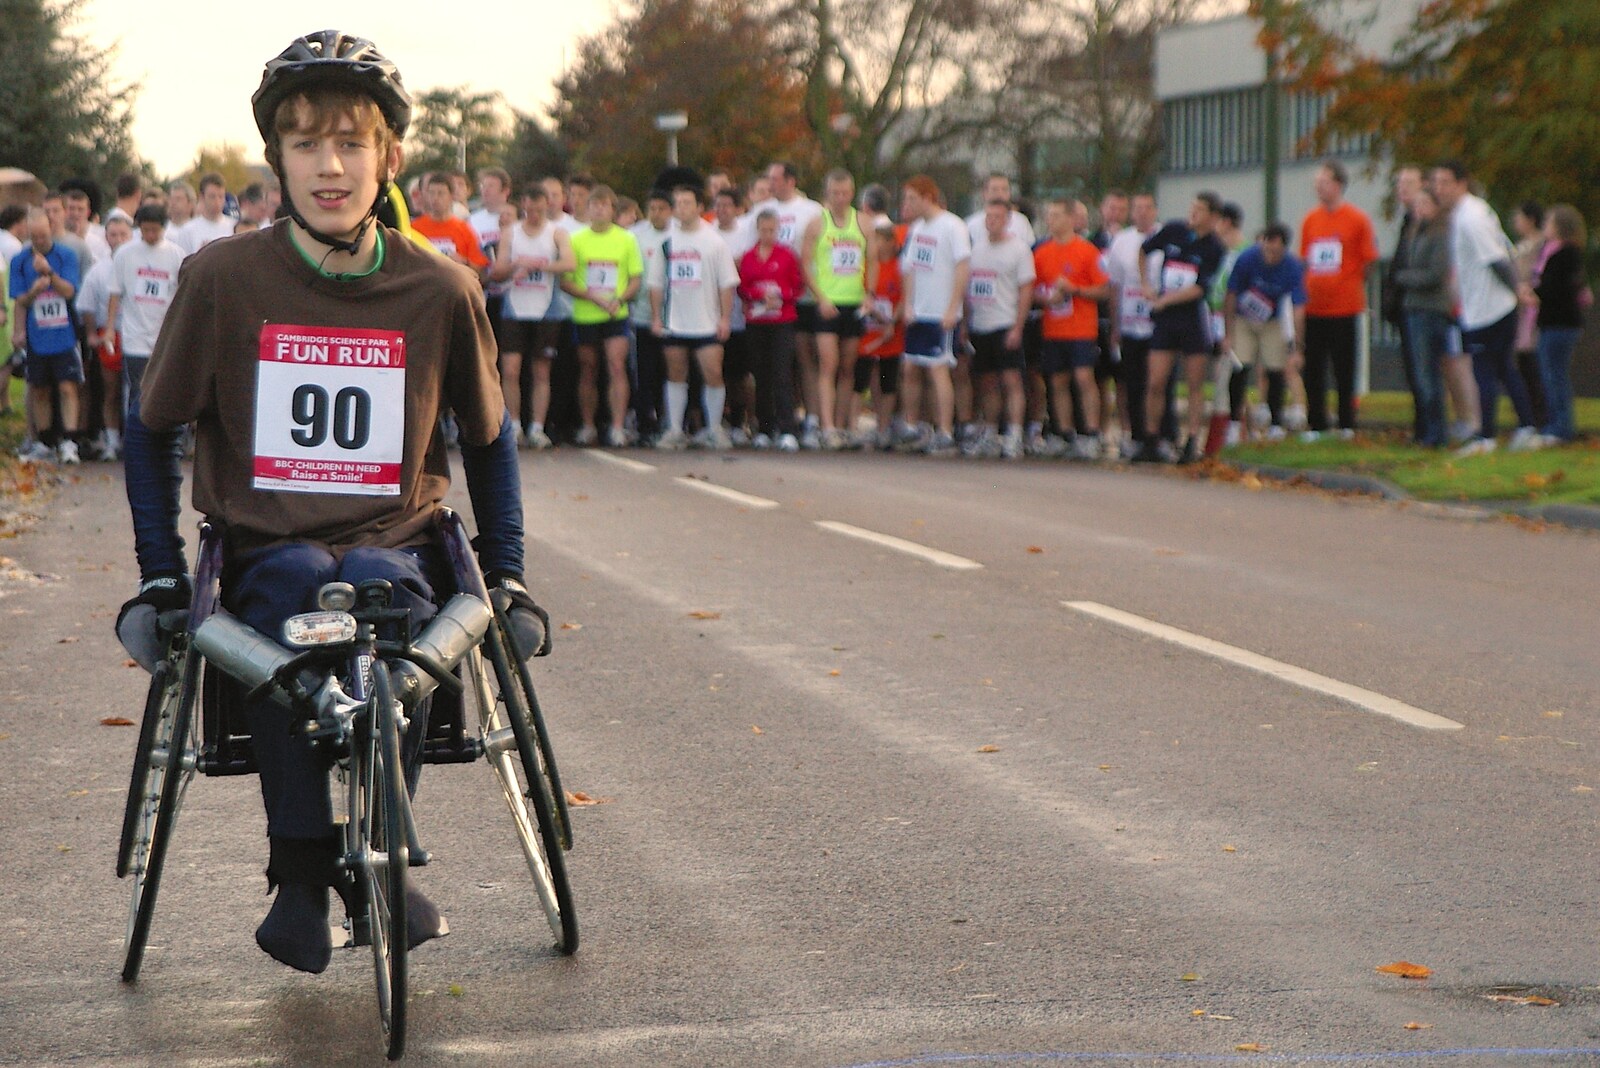 A wheelchair entrant waits to go at the starting line from Cambridge Science Park "Children in Need" Fun Run, Milton Road, Cambridge - 17th November 2006